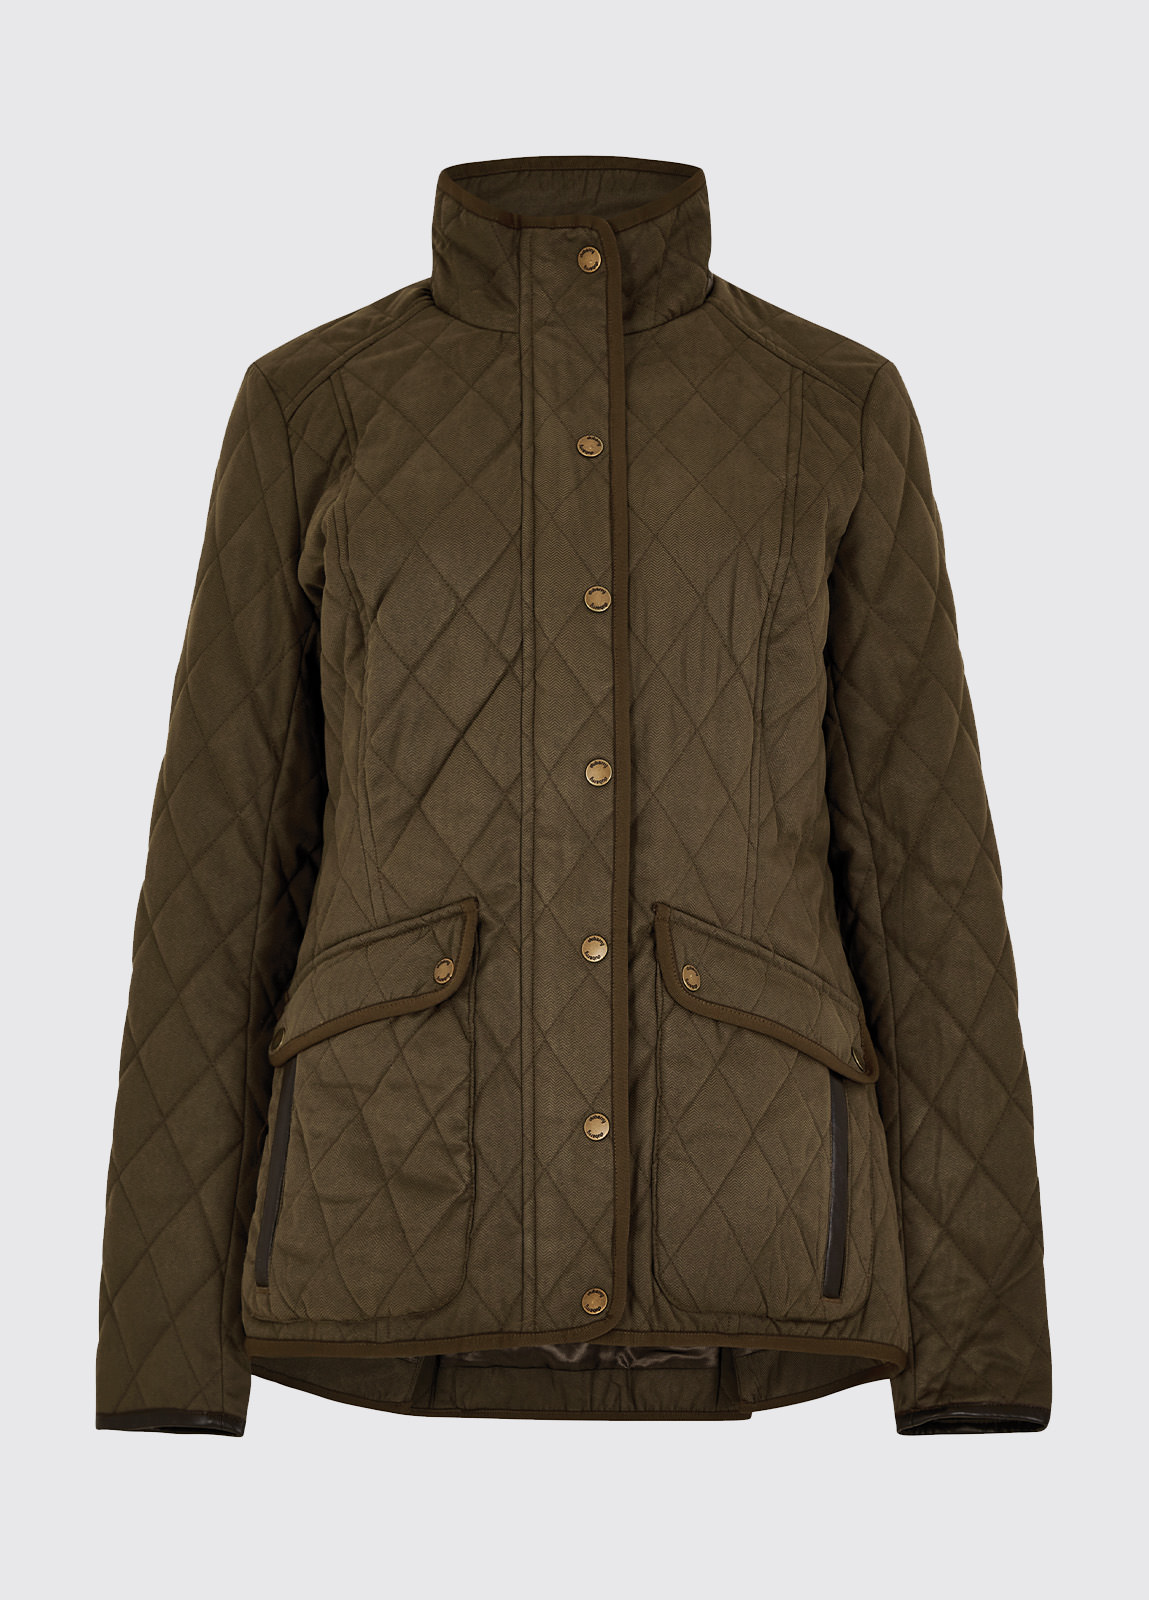 Corrib Quilted Jacket - Breen - Size EU38